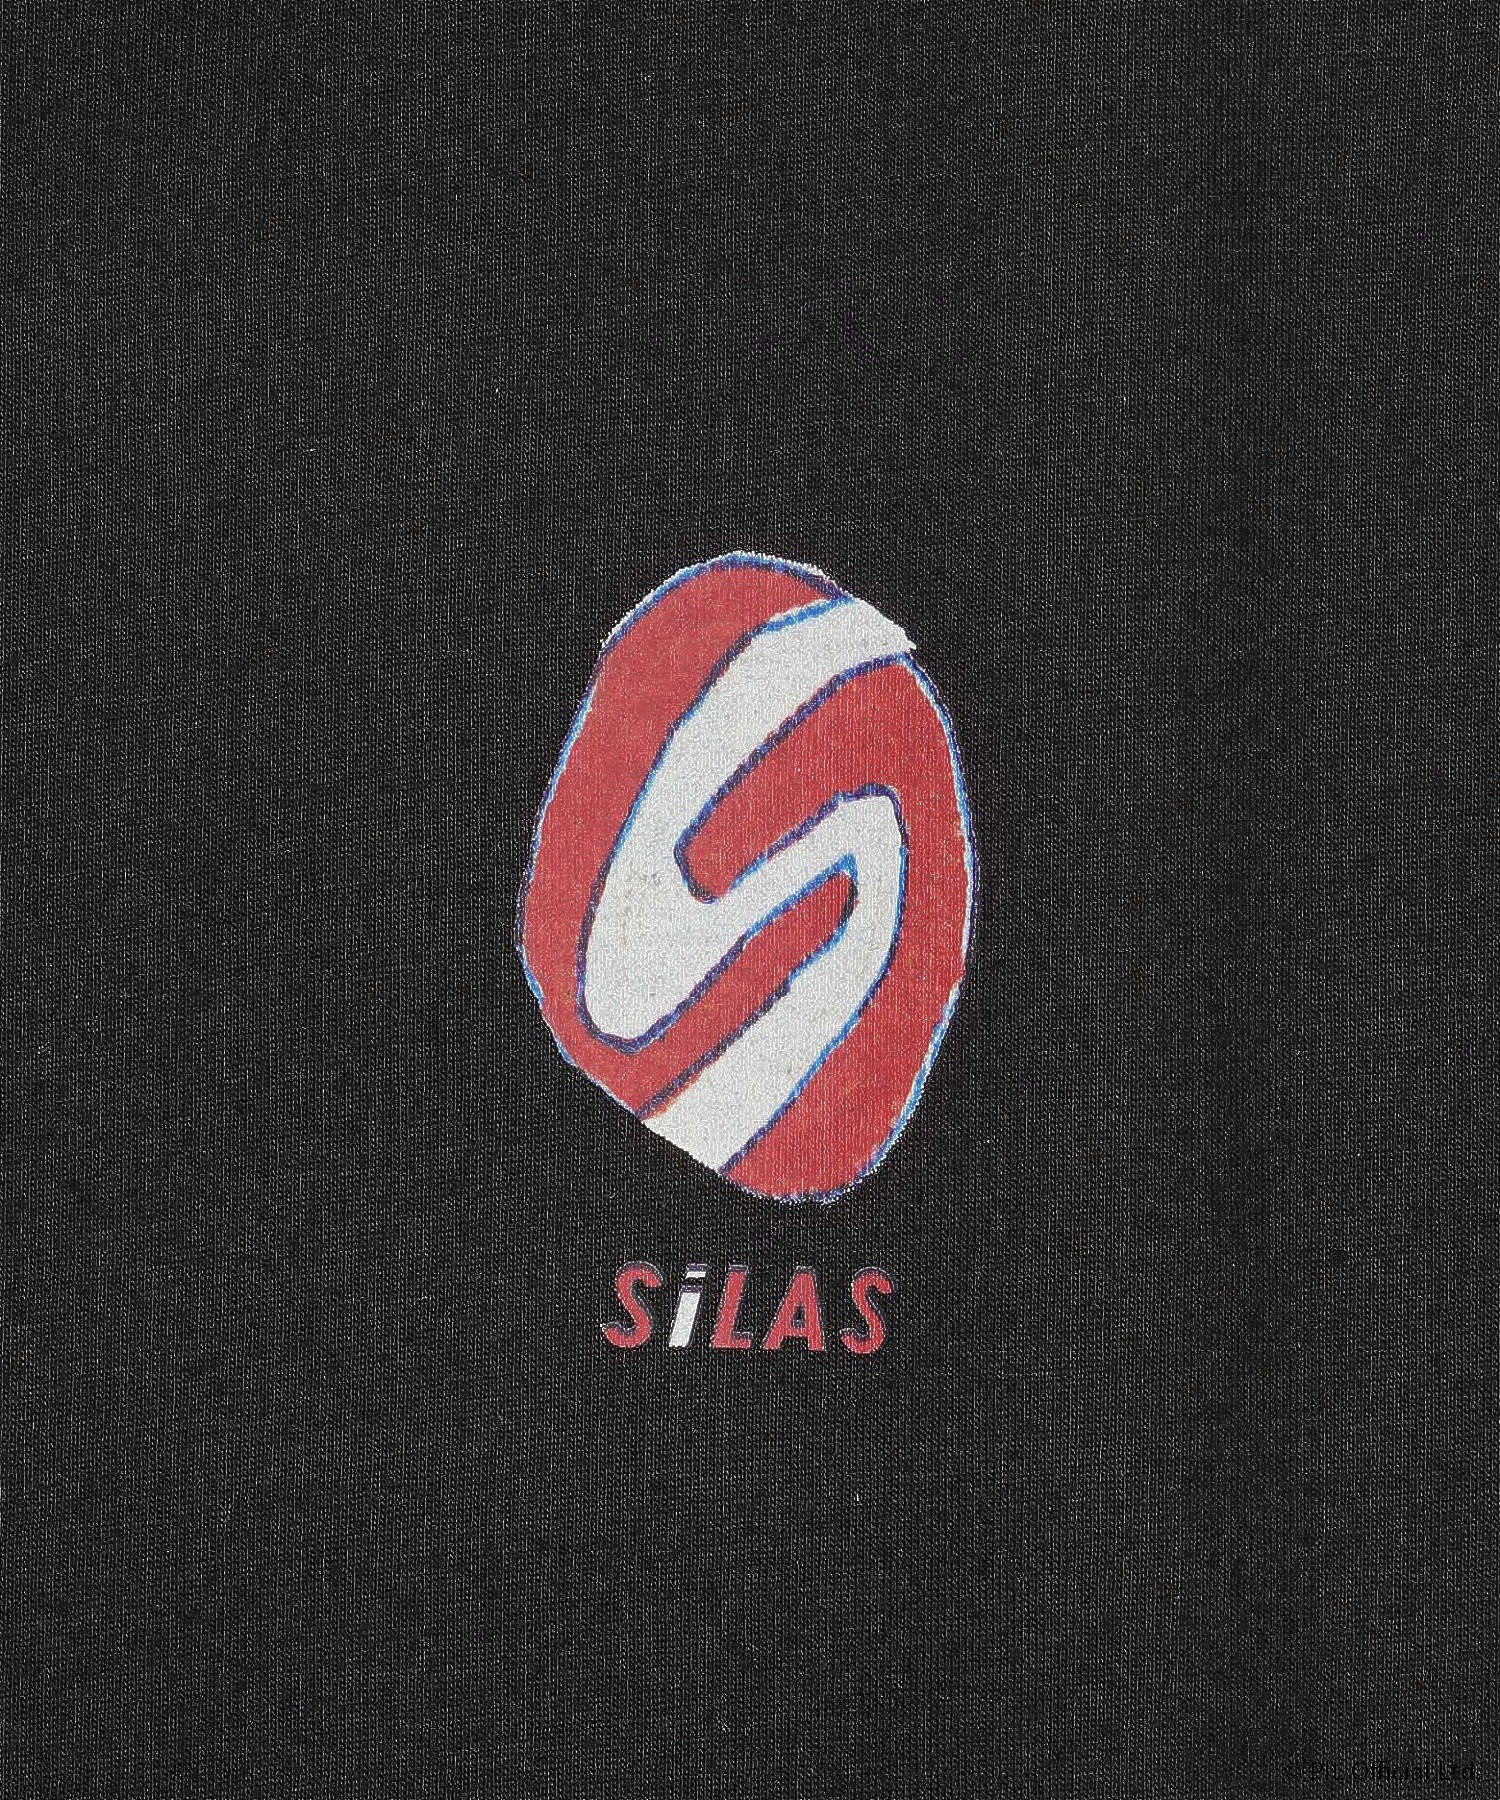 SILASxPiL GRAPHIC S/S TEE